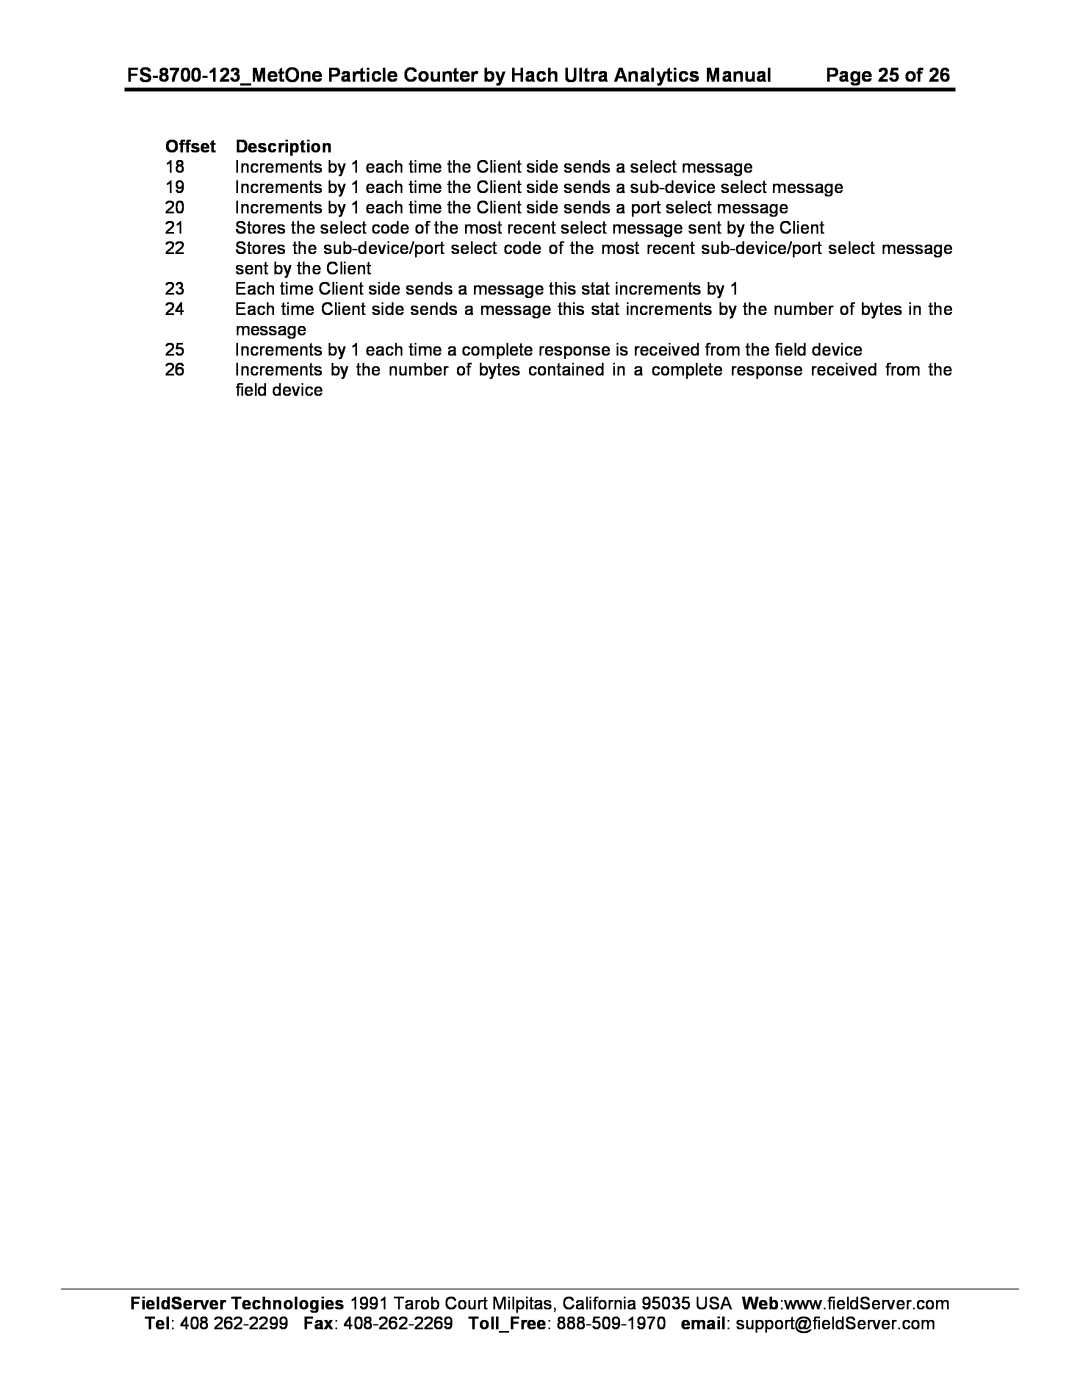 FieldServer instruction manual FS-8700-123MetOne Particle Counter by Hach Ultra Analytics Manual, Page 25 of 